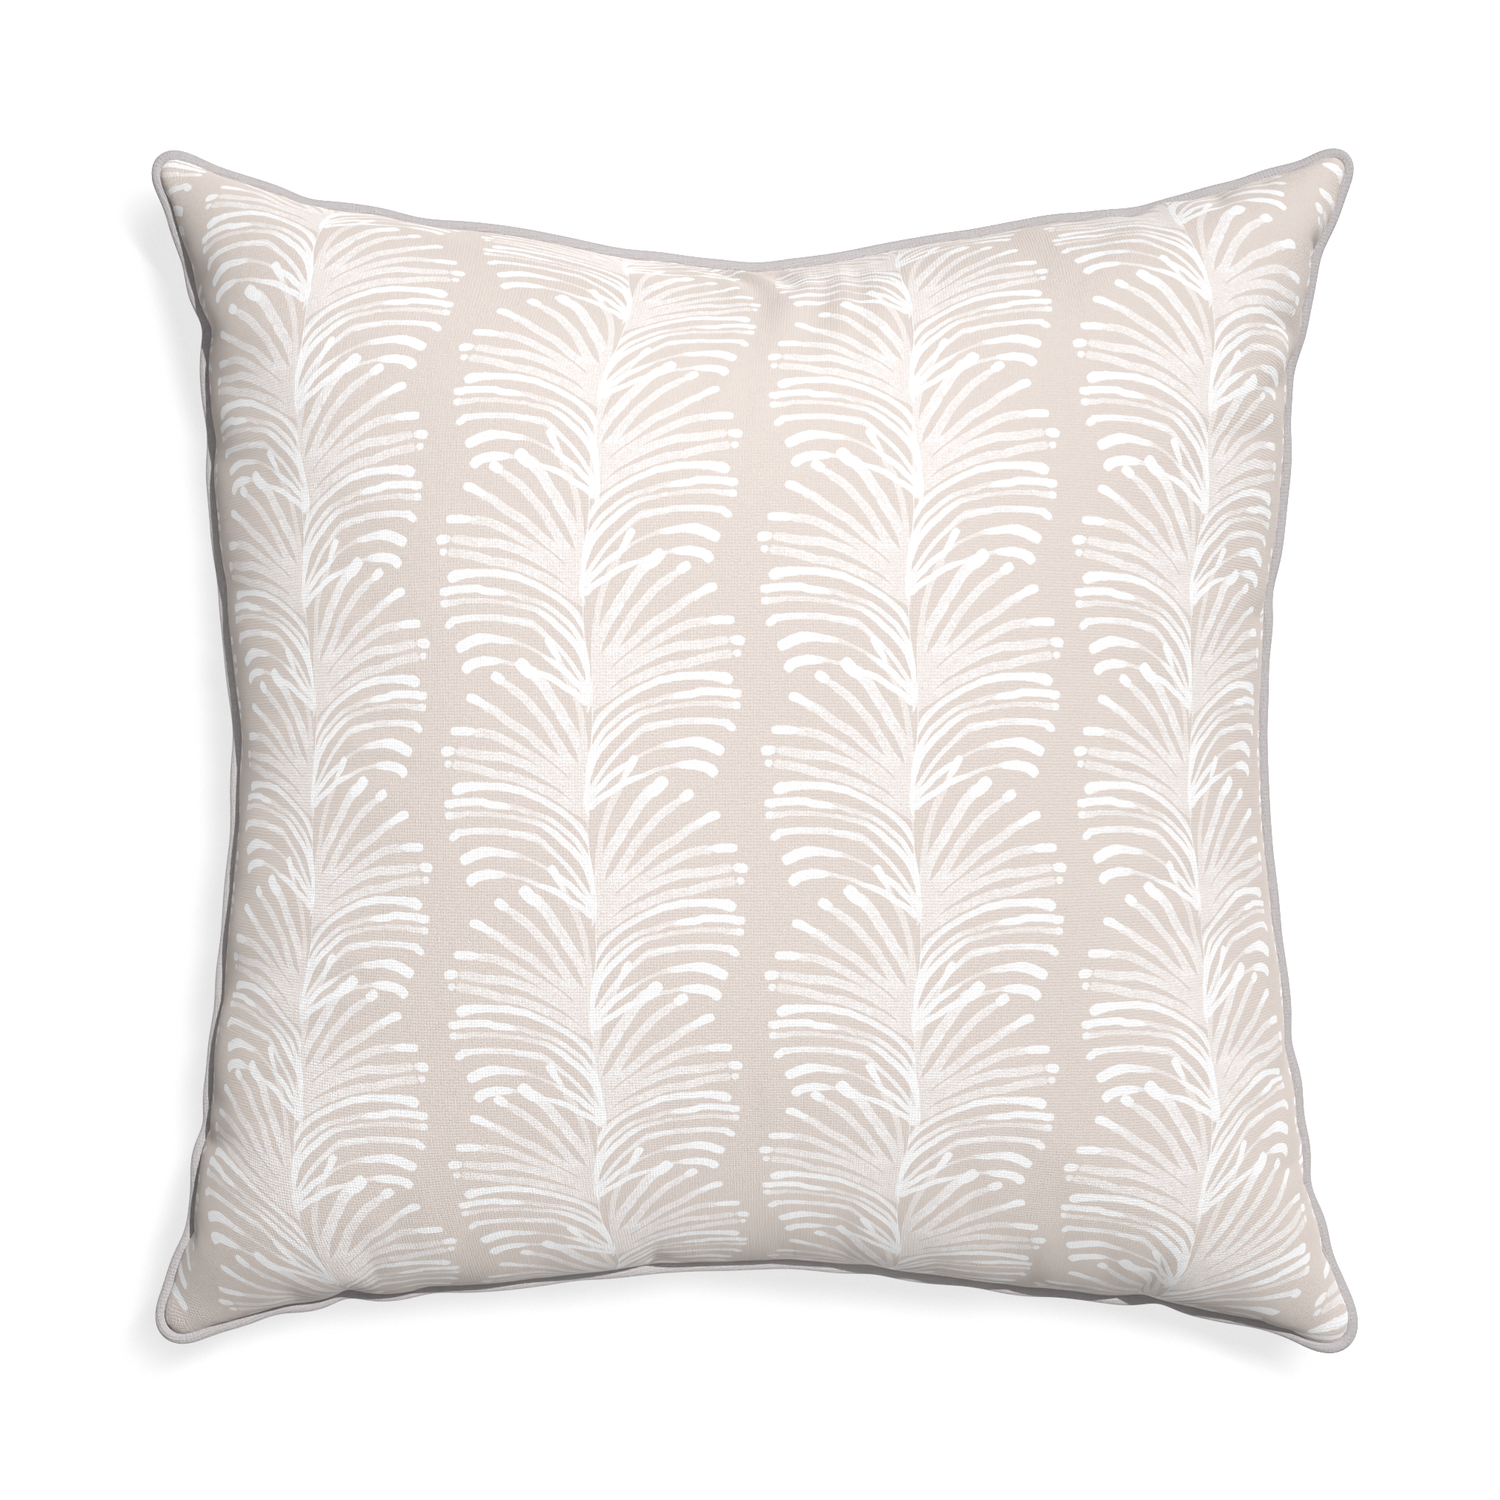 Euro-sham emma sand custom pillow with pebble piping on white background